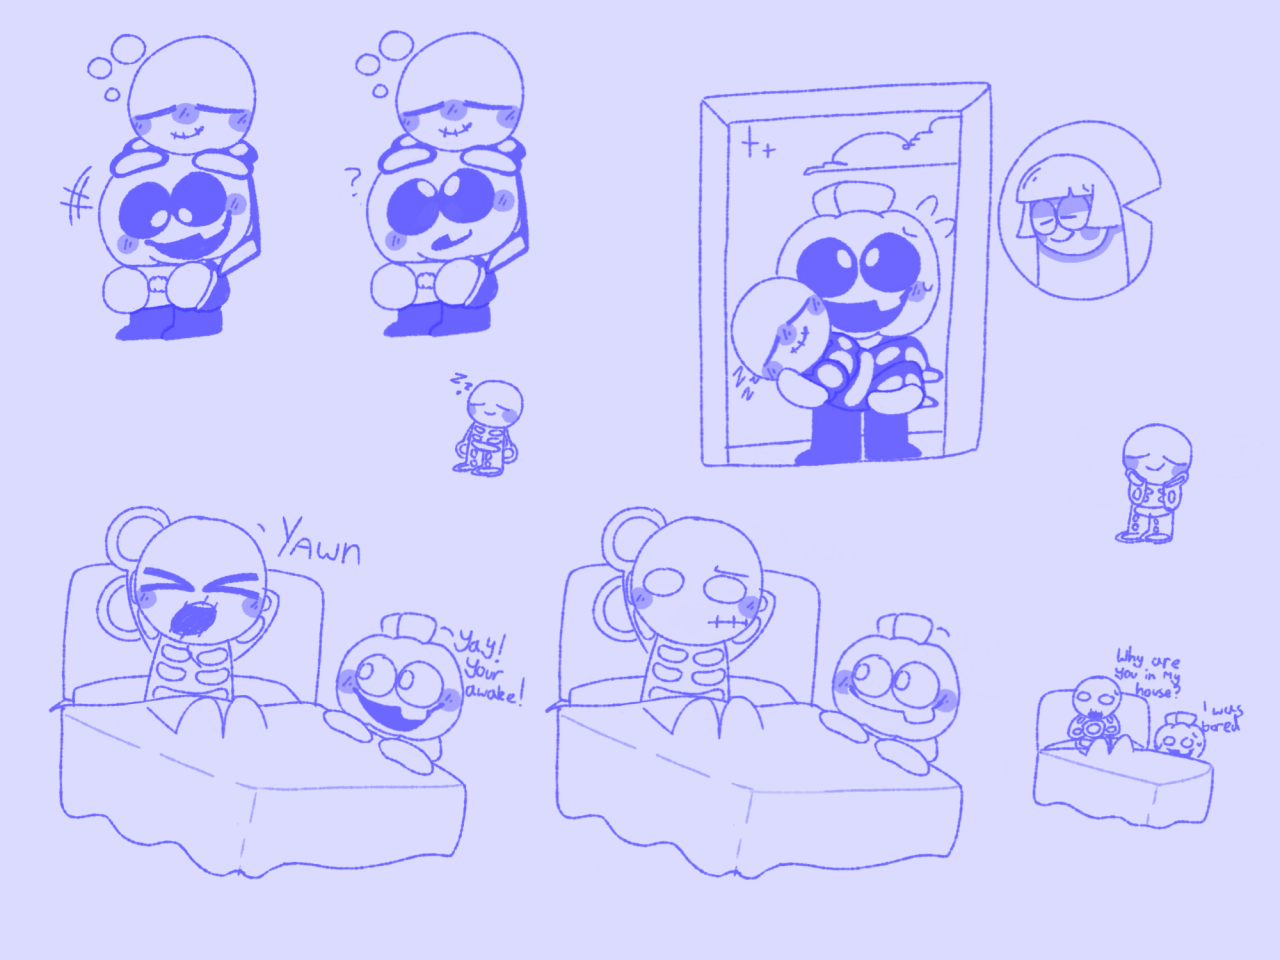 Spooky Scary Skeleton Its 1 Am Here So Heres Some Sleepy Skid Doodles